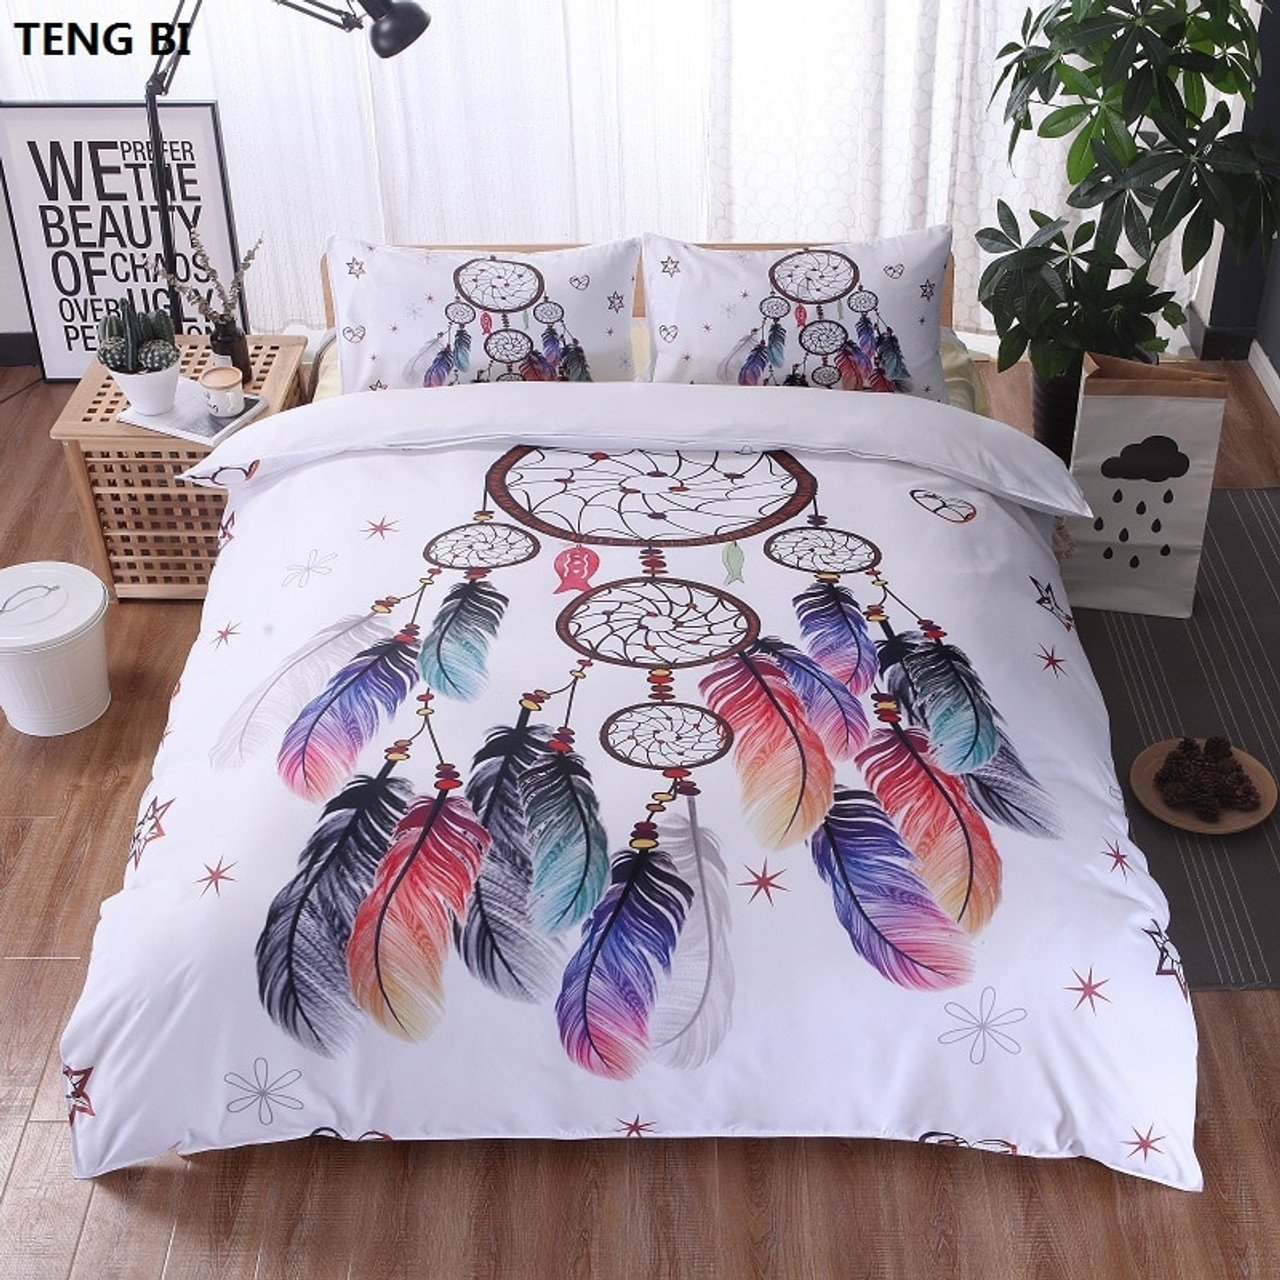 Hot Hipster Watercolor Bedding Set King Queen Full Twin Size